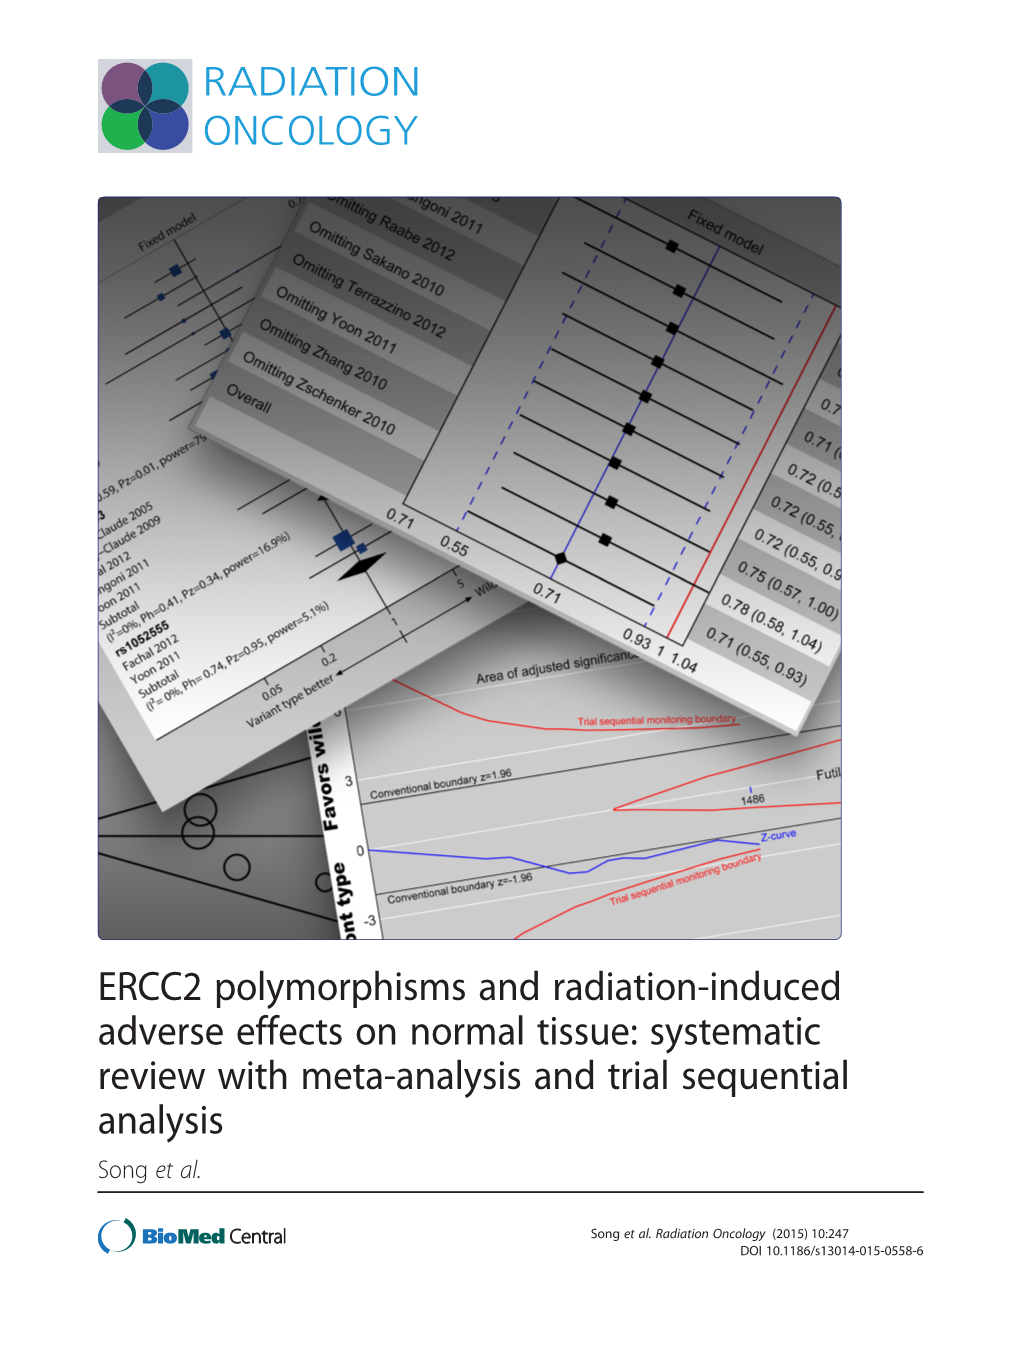 ERCC2 Polymorphisms and Radiation-Induced Adverse Effects on Normal Tissue: Systematic Review with Meta-Analysis and Trial Sequential Analysis Song Et Al